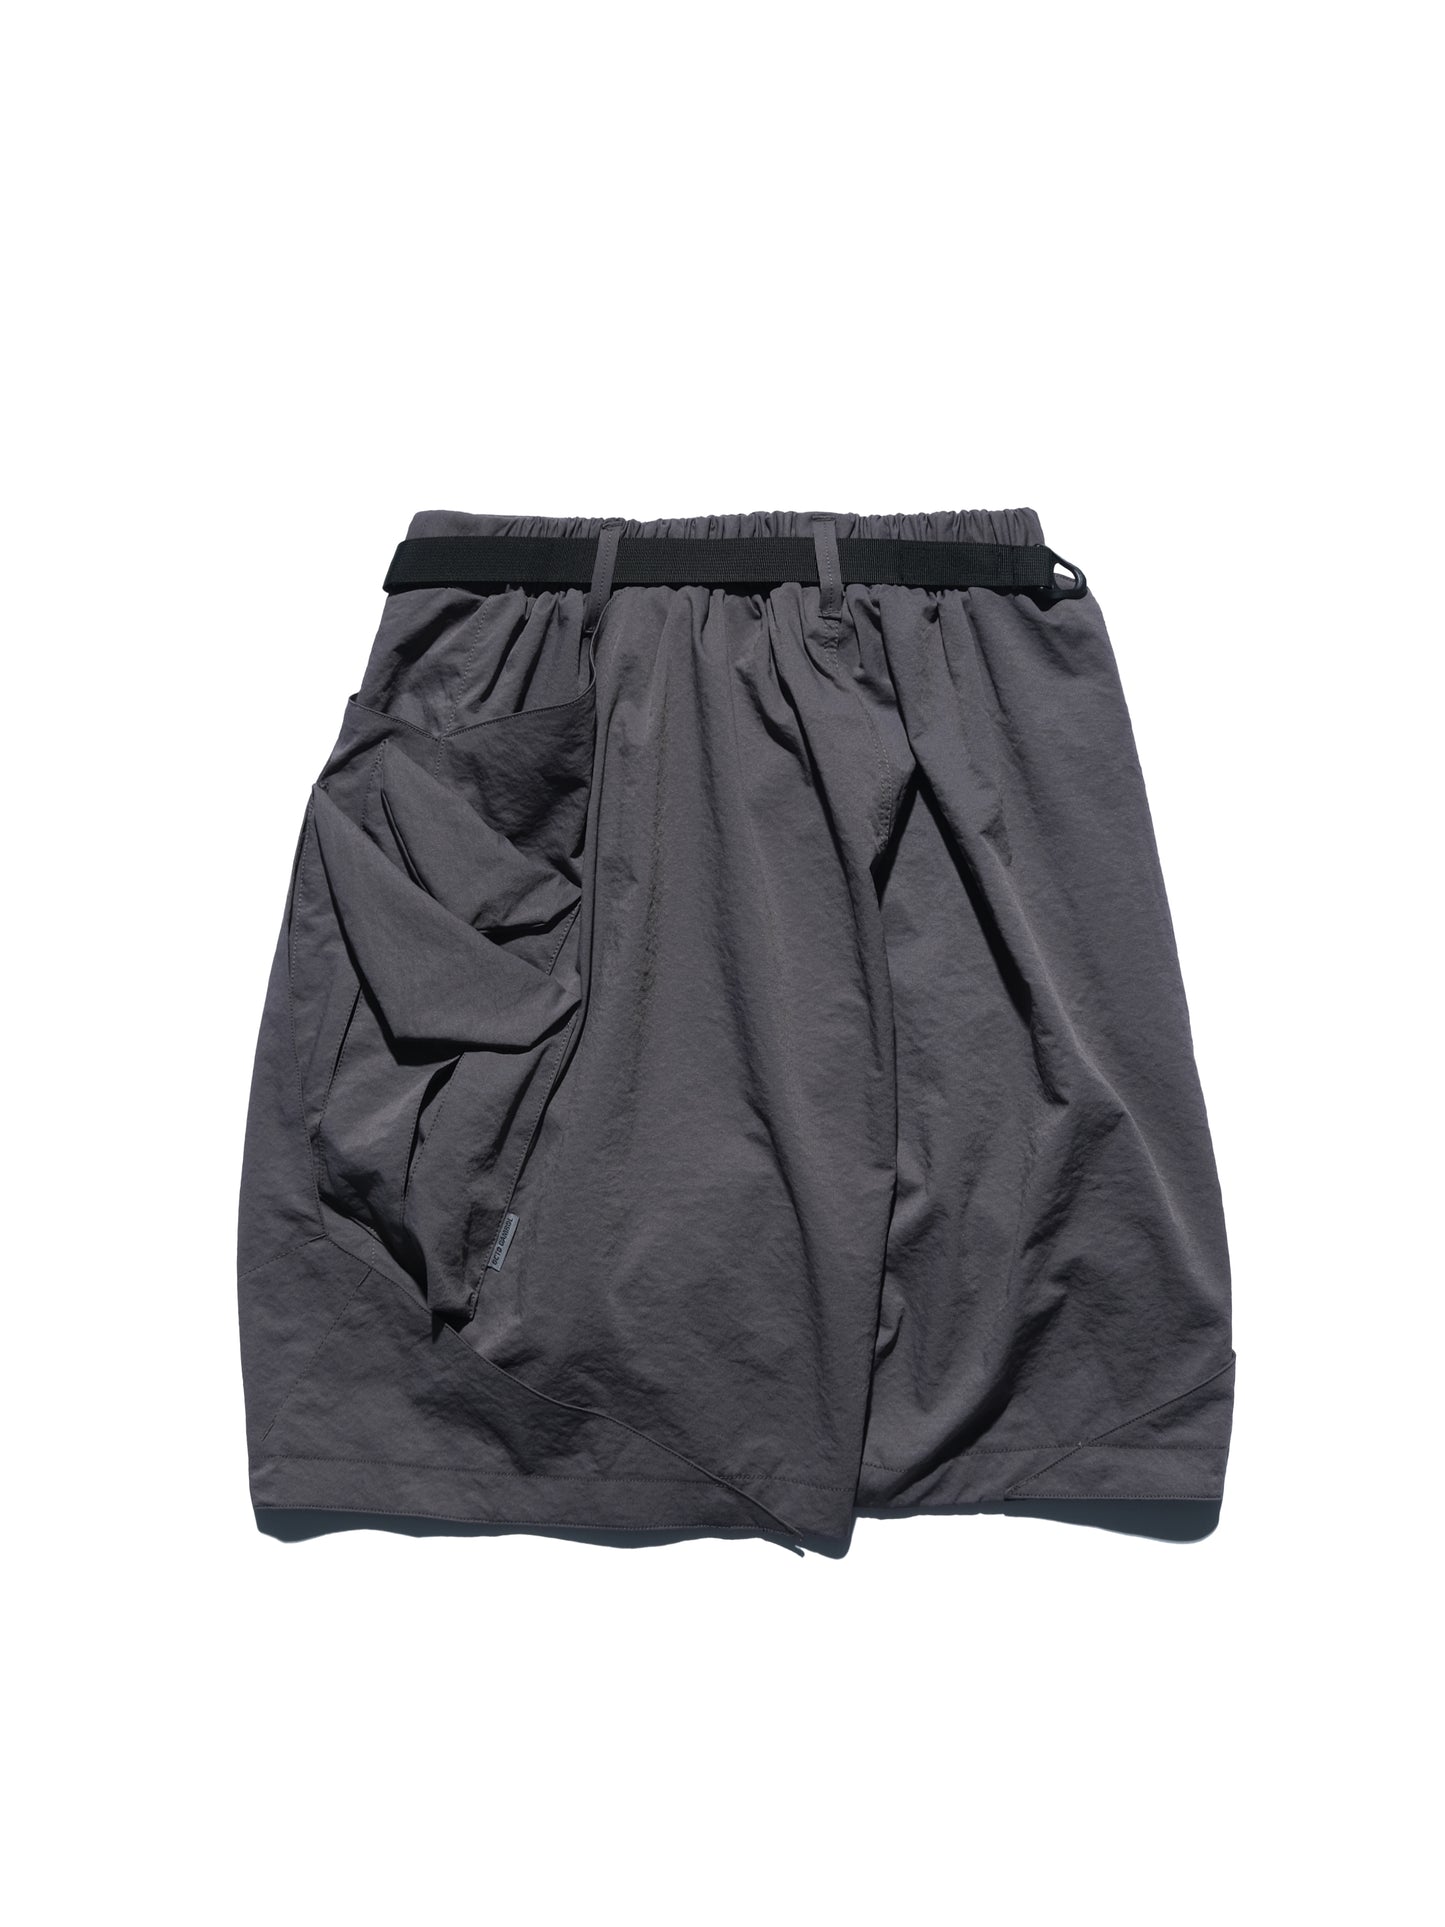 OCTO GAMBOL SS23 / 05 — S23-067 Switchable Breathing Shorts (Grey)